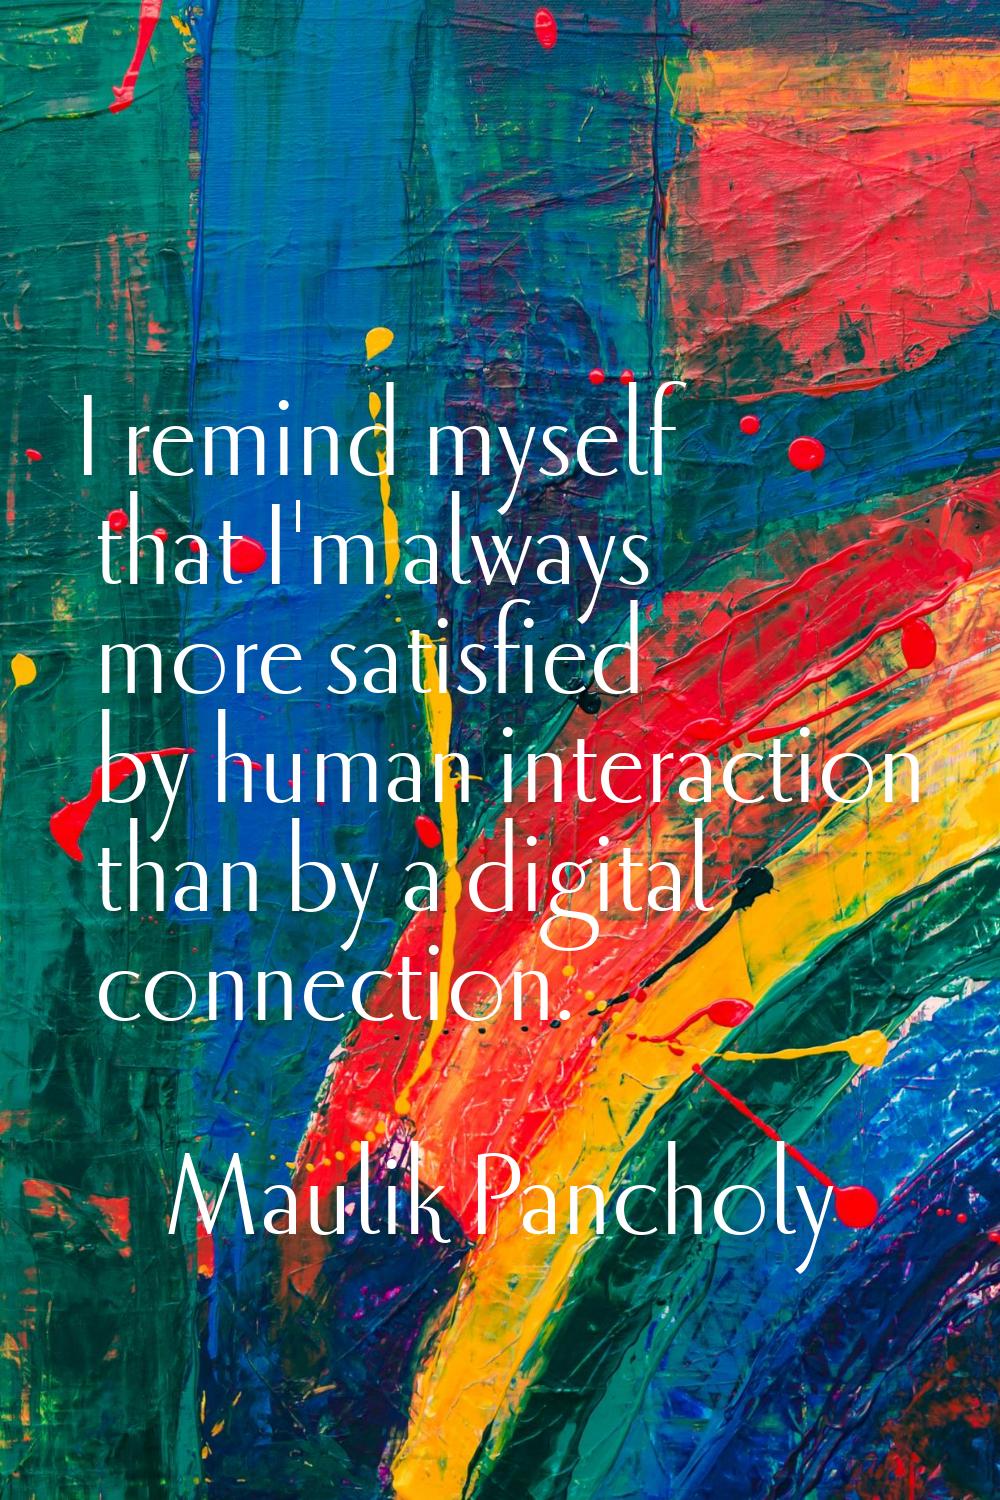 I remind myself that I'm always more satisfied by human interaction than by a digital connection.